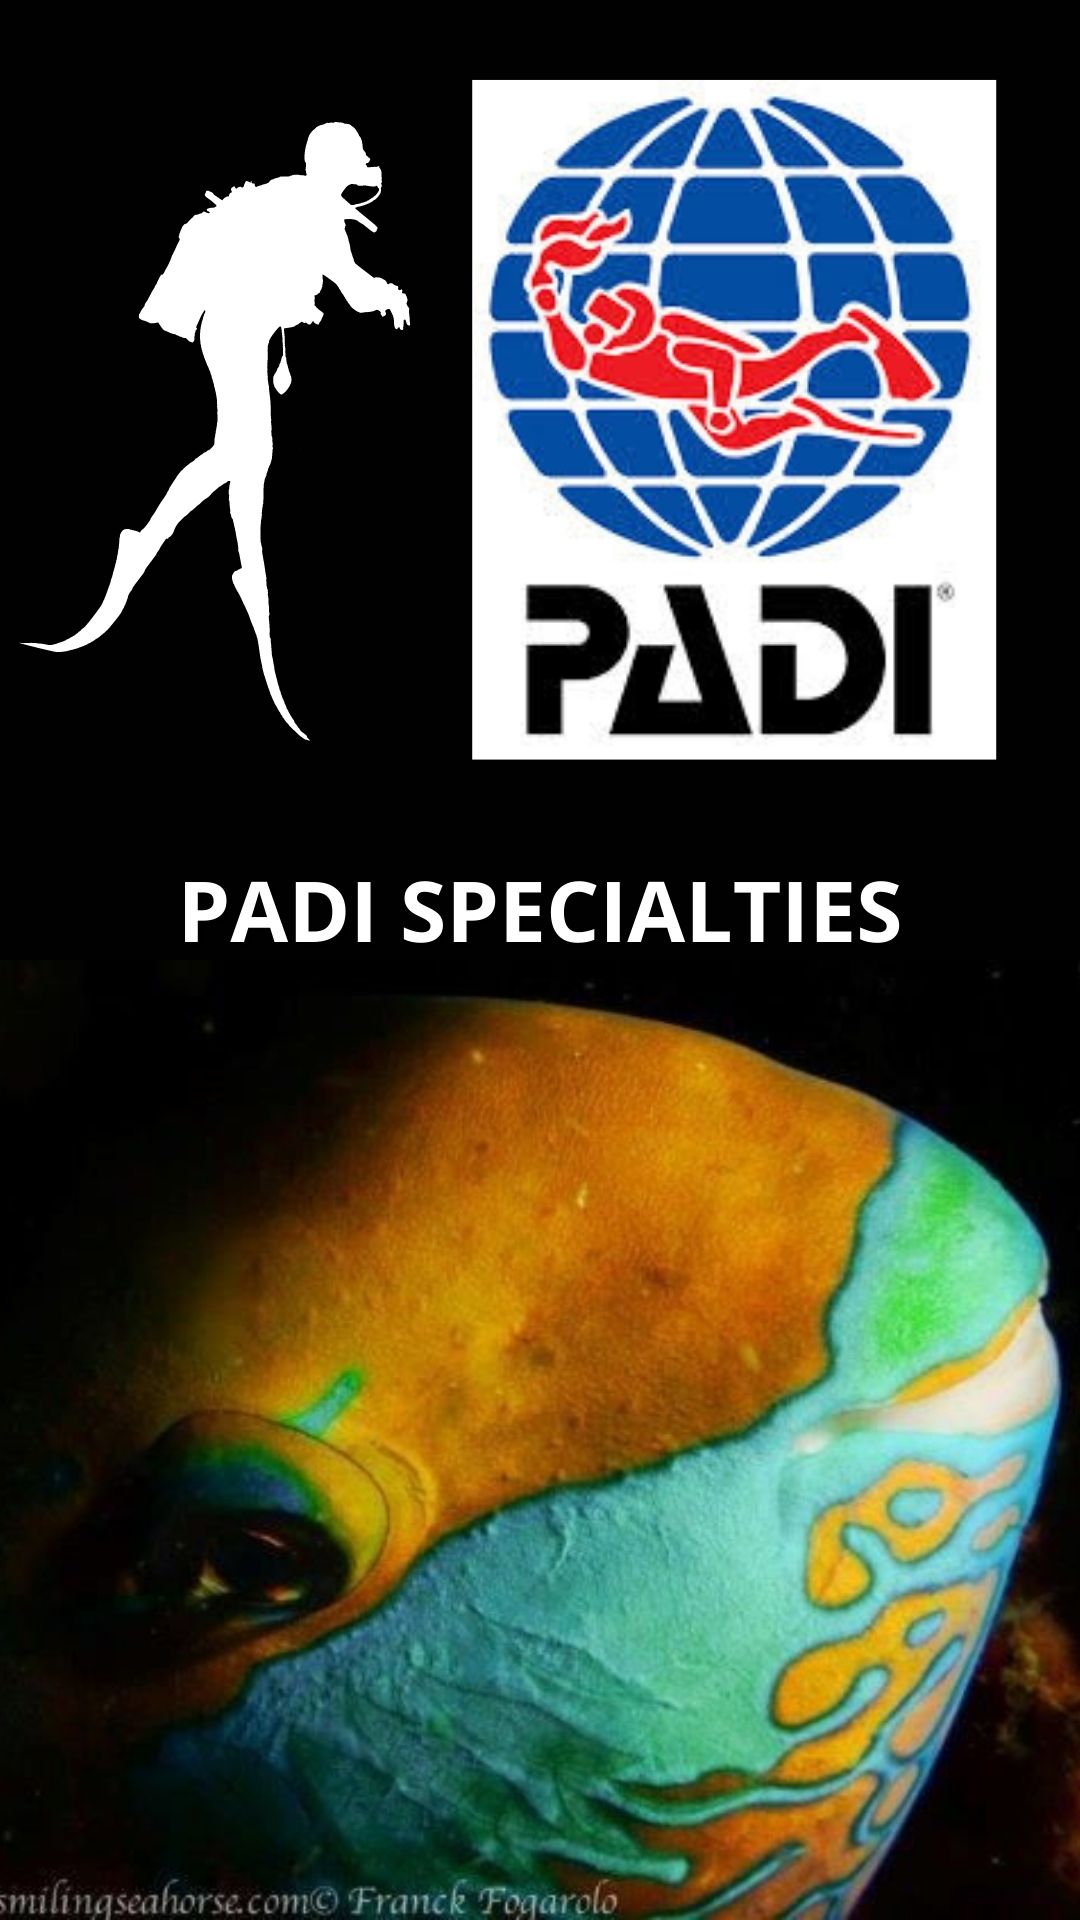 PADI Specialties enhance your diving skills and allow you to explore facets of scuba diving